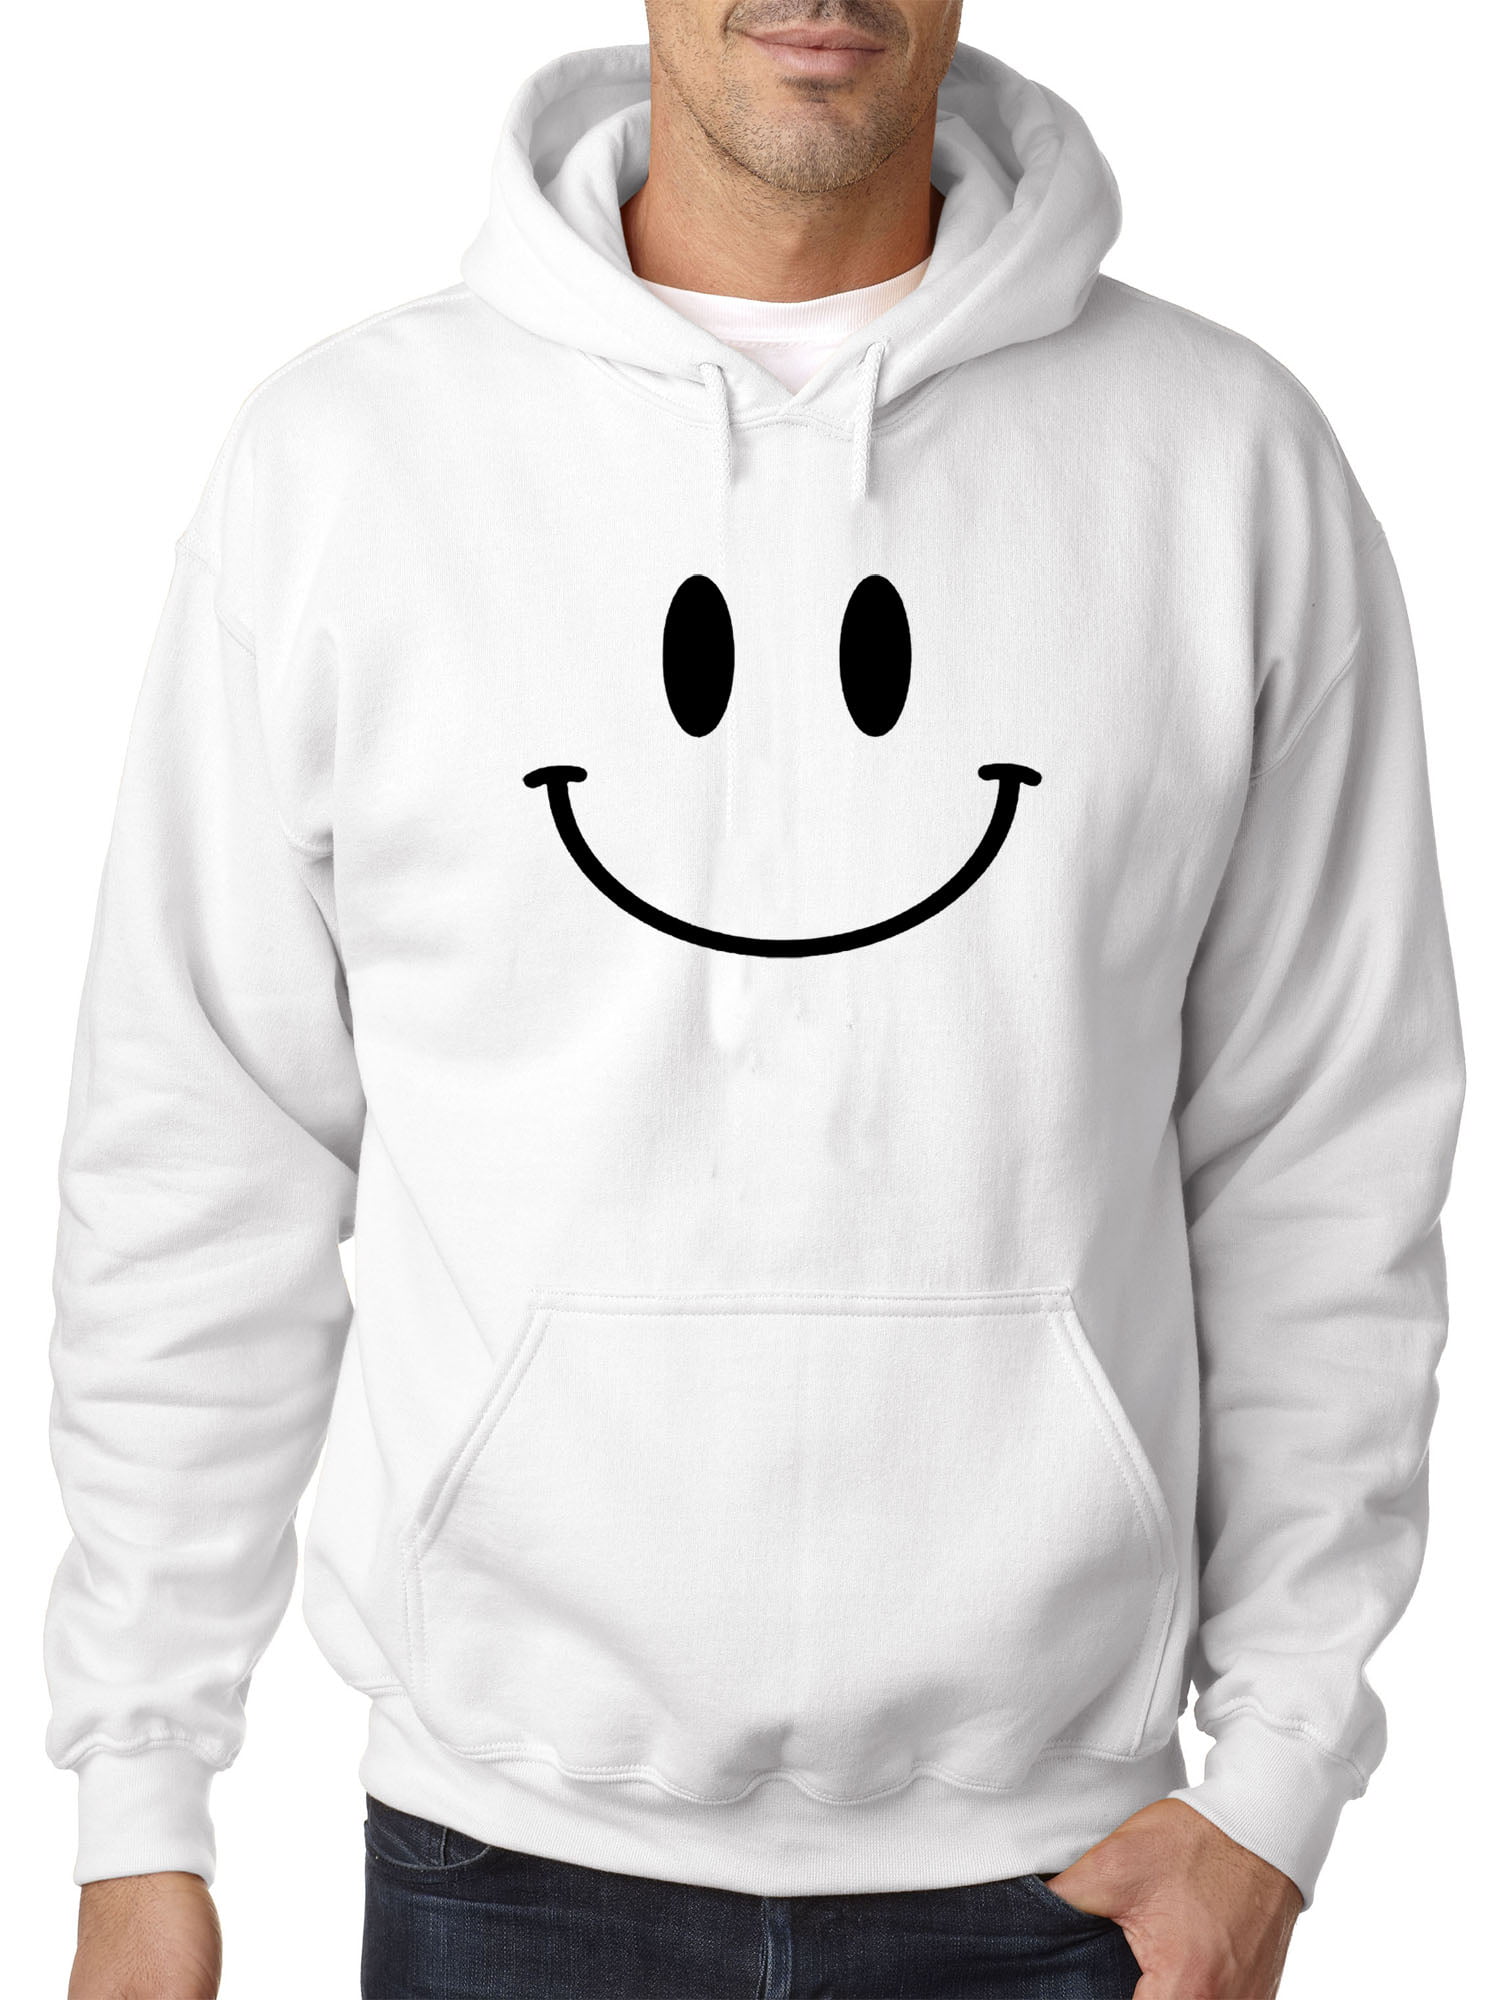 Source One 849 - Adult Hoodie Smiley Face Smile Happy Sweatshirt Small White